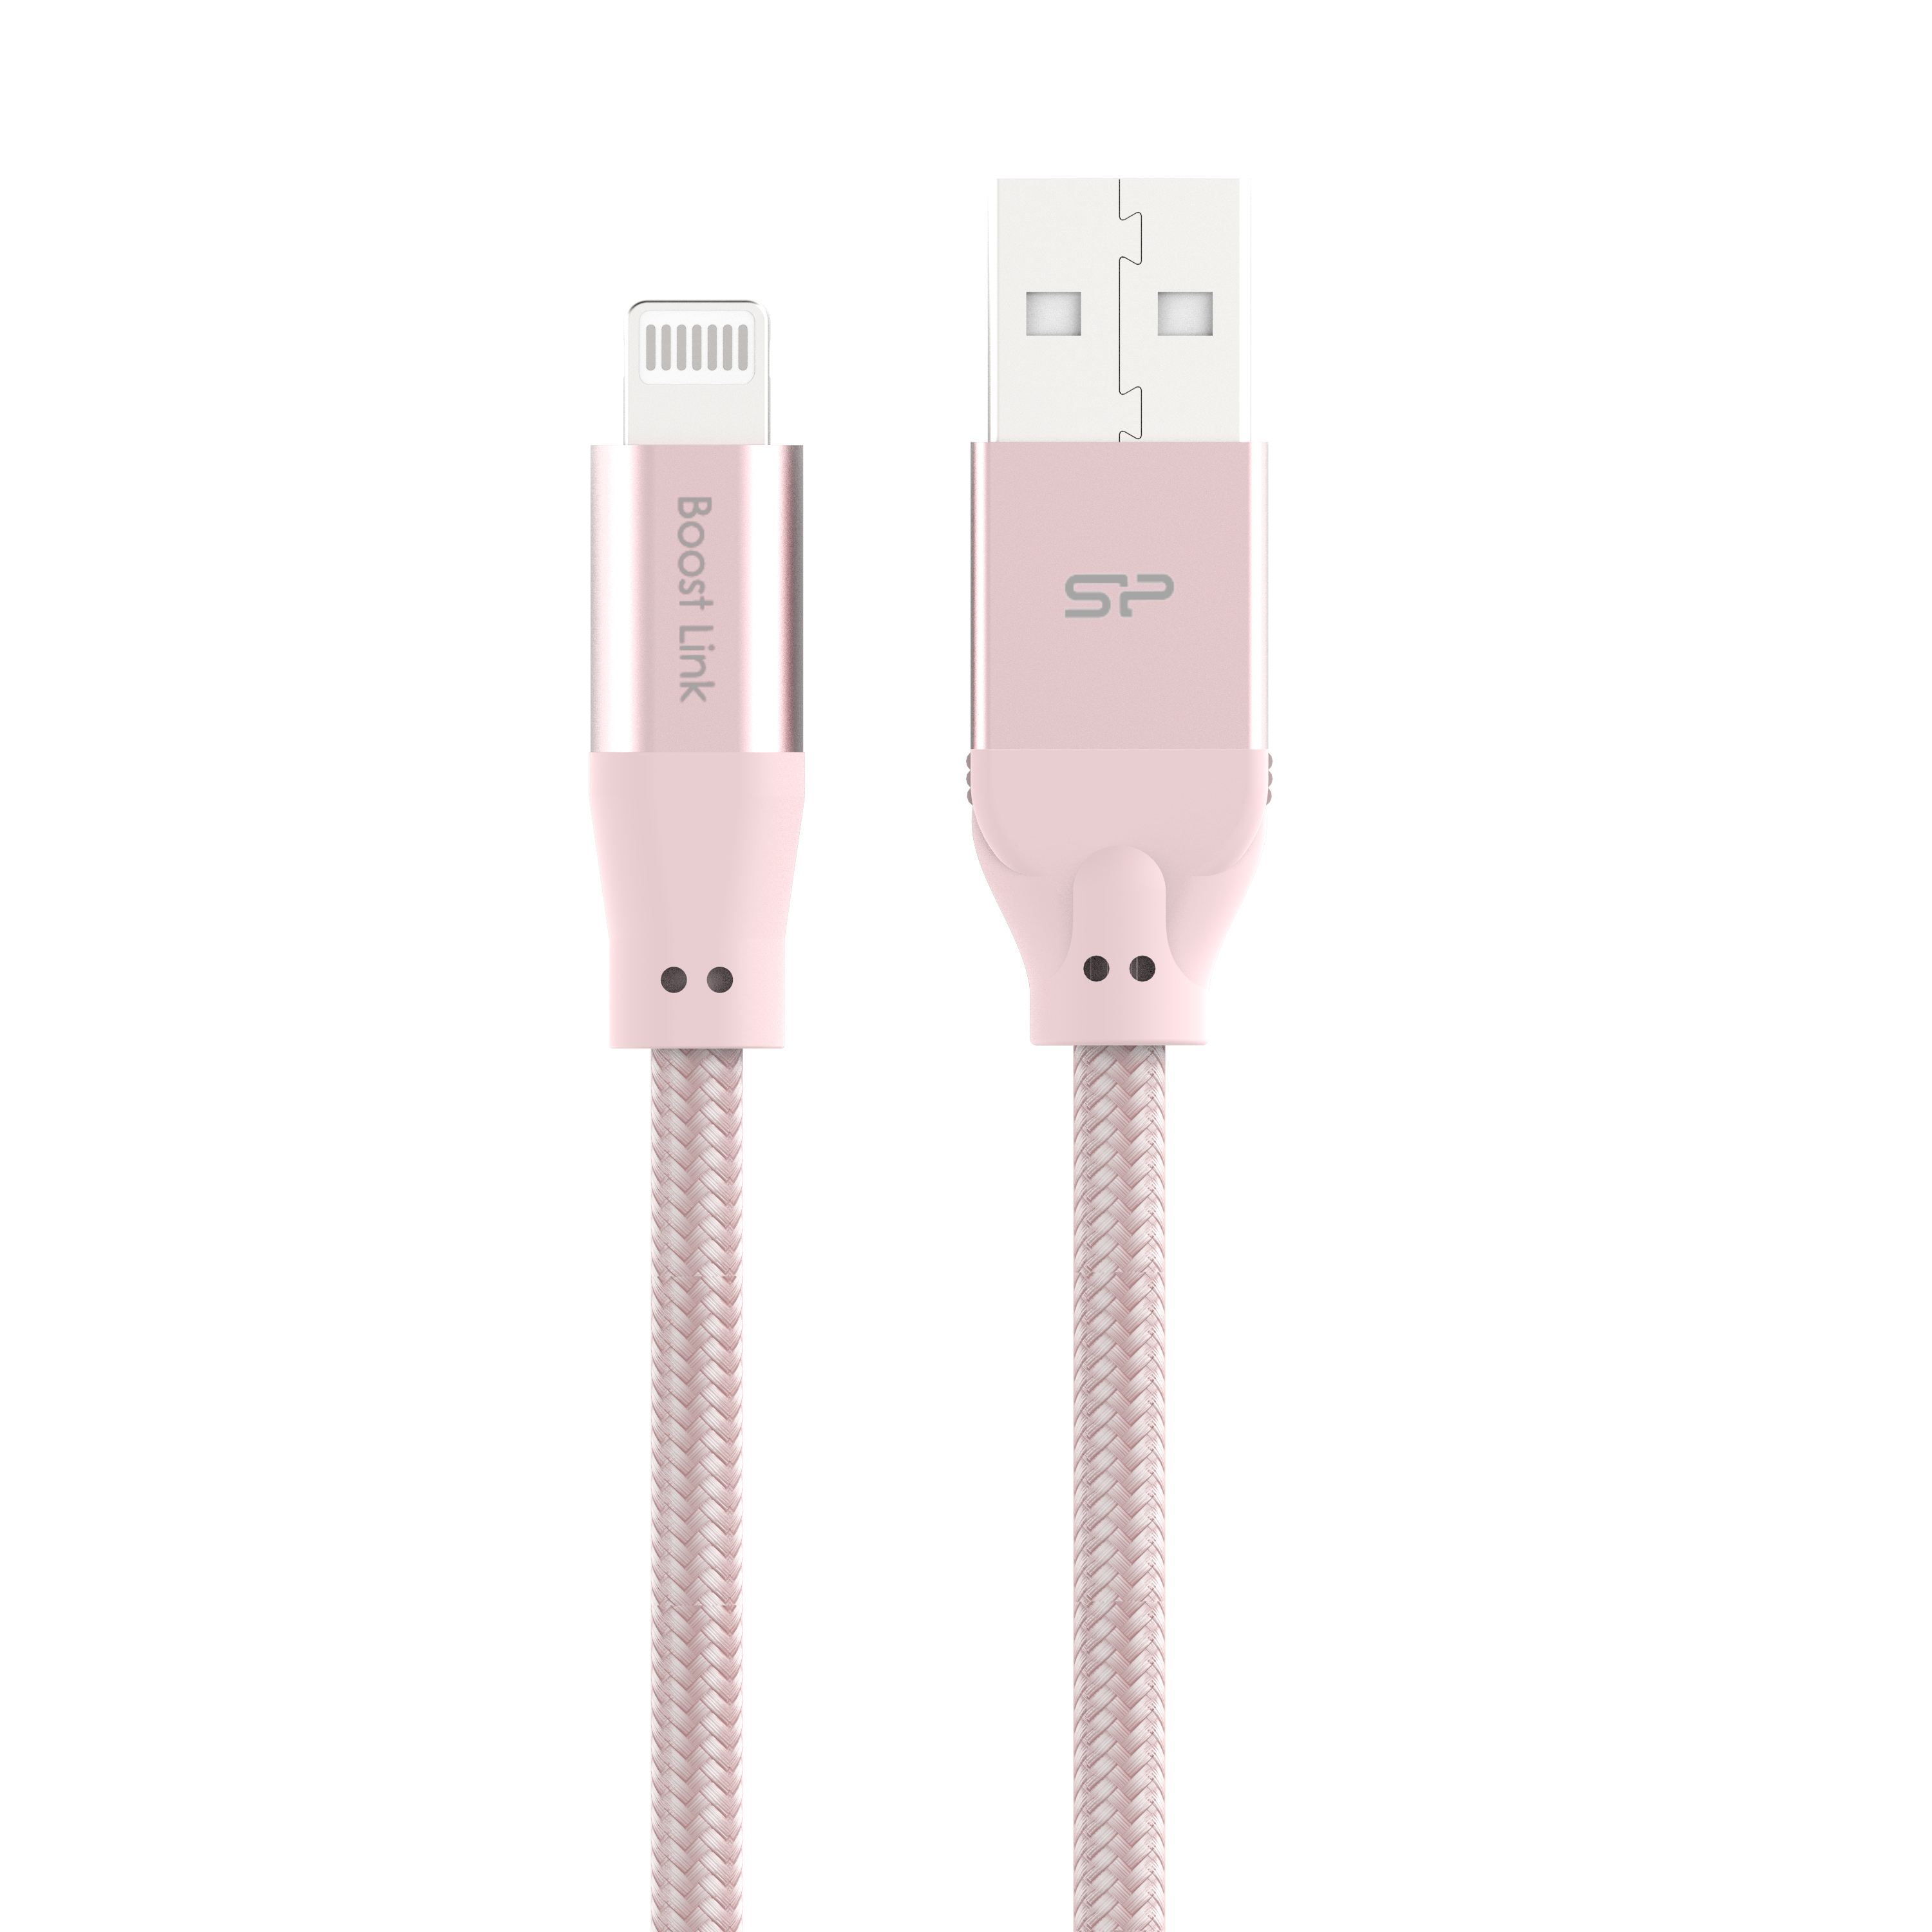 Silicon Power Lightning USB Braided Cable 1m - Pink